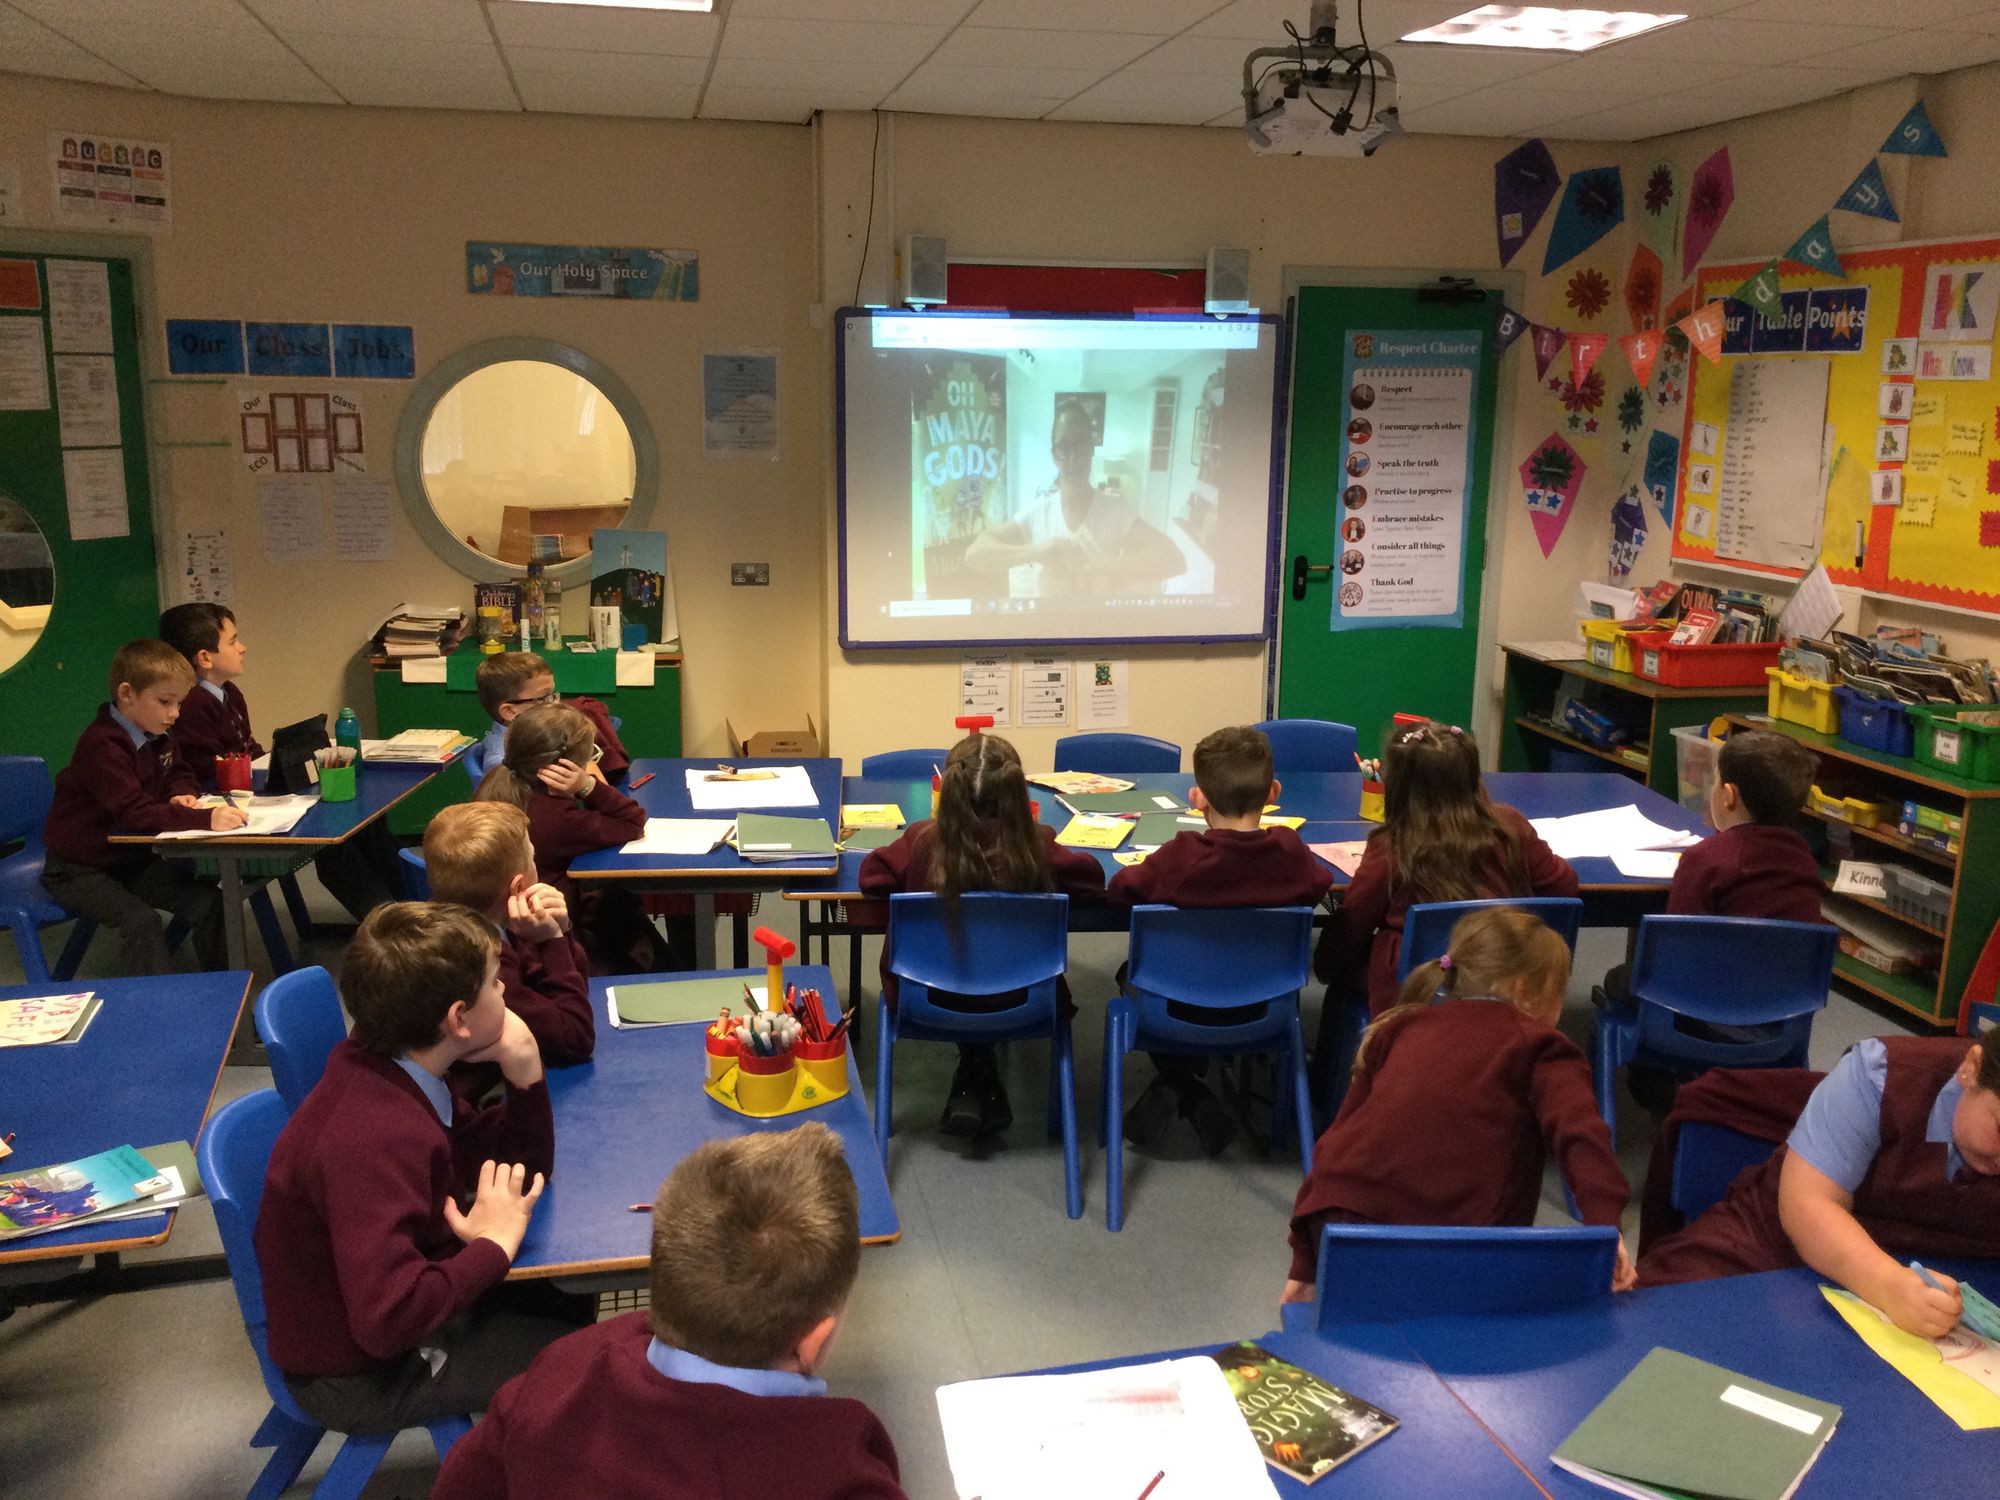 Year 4 enjoying the online session with author Maz Evans.